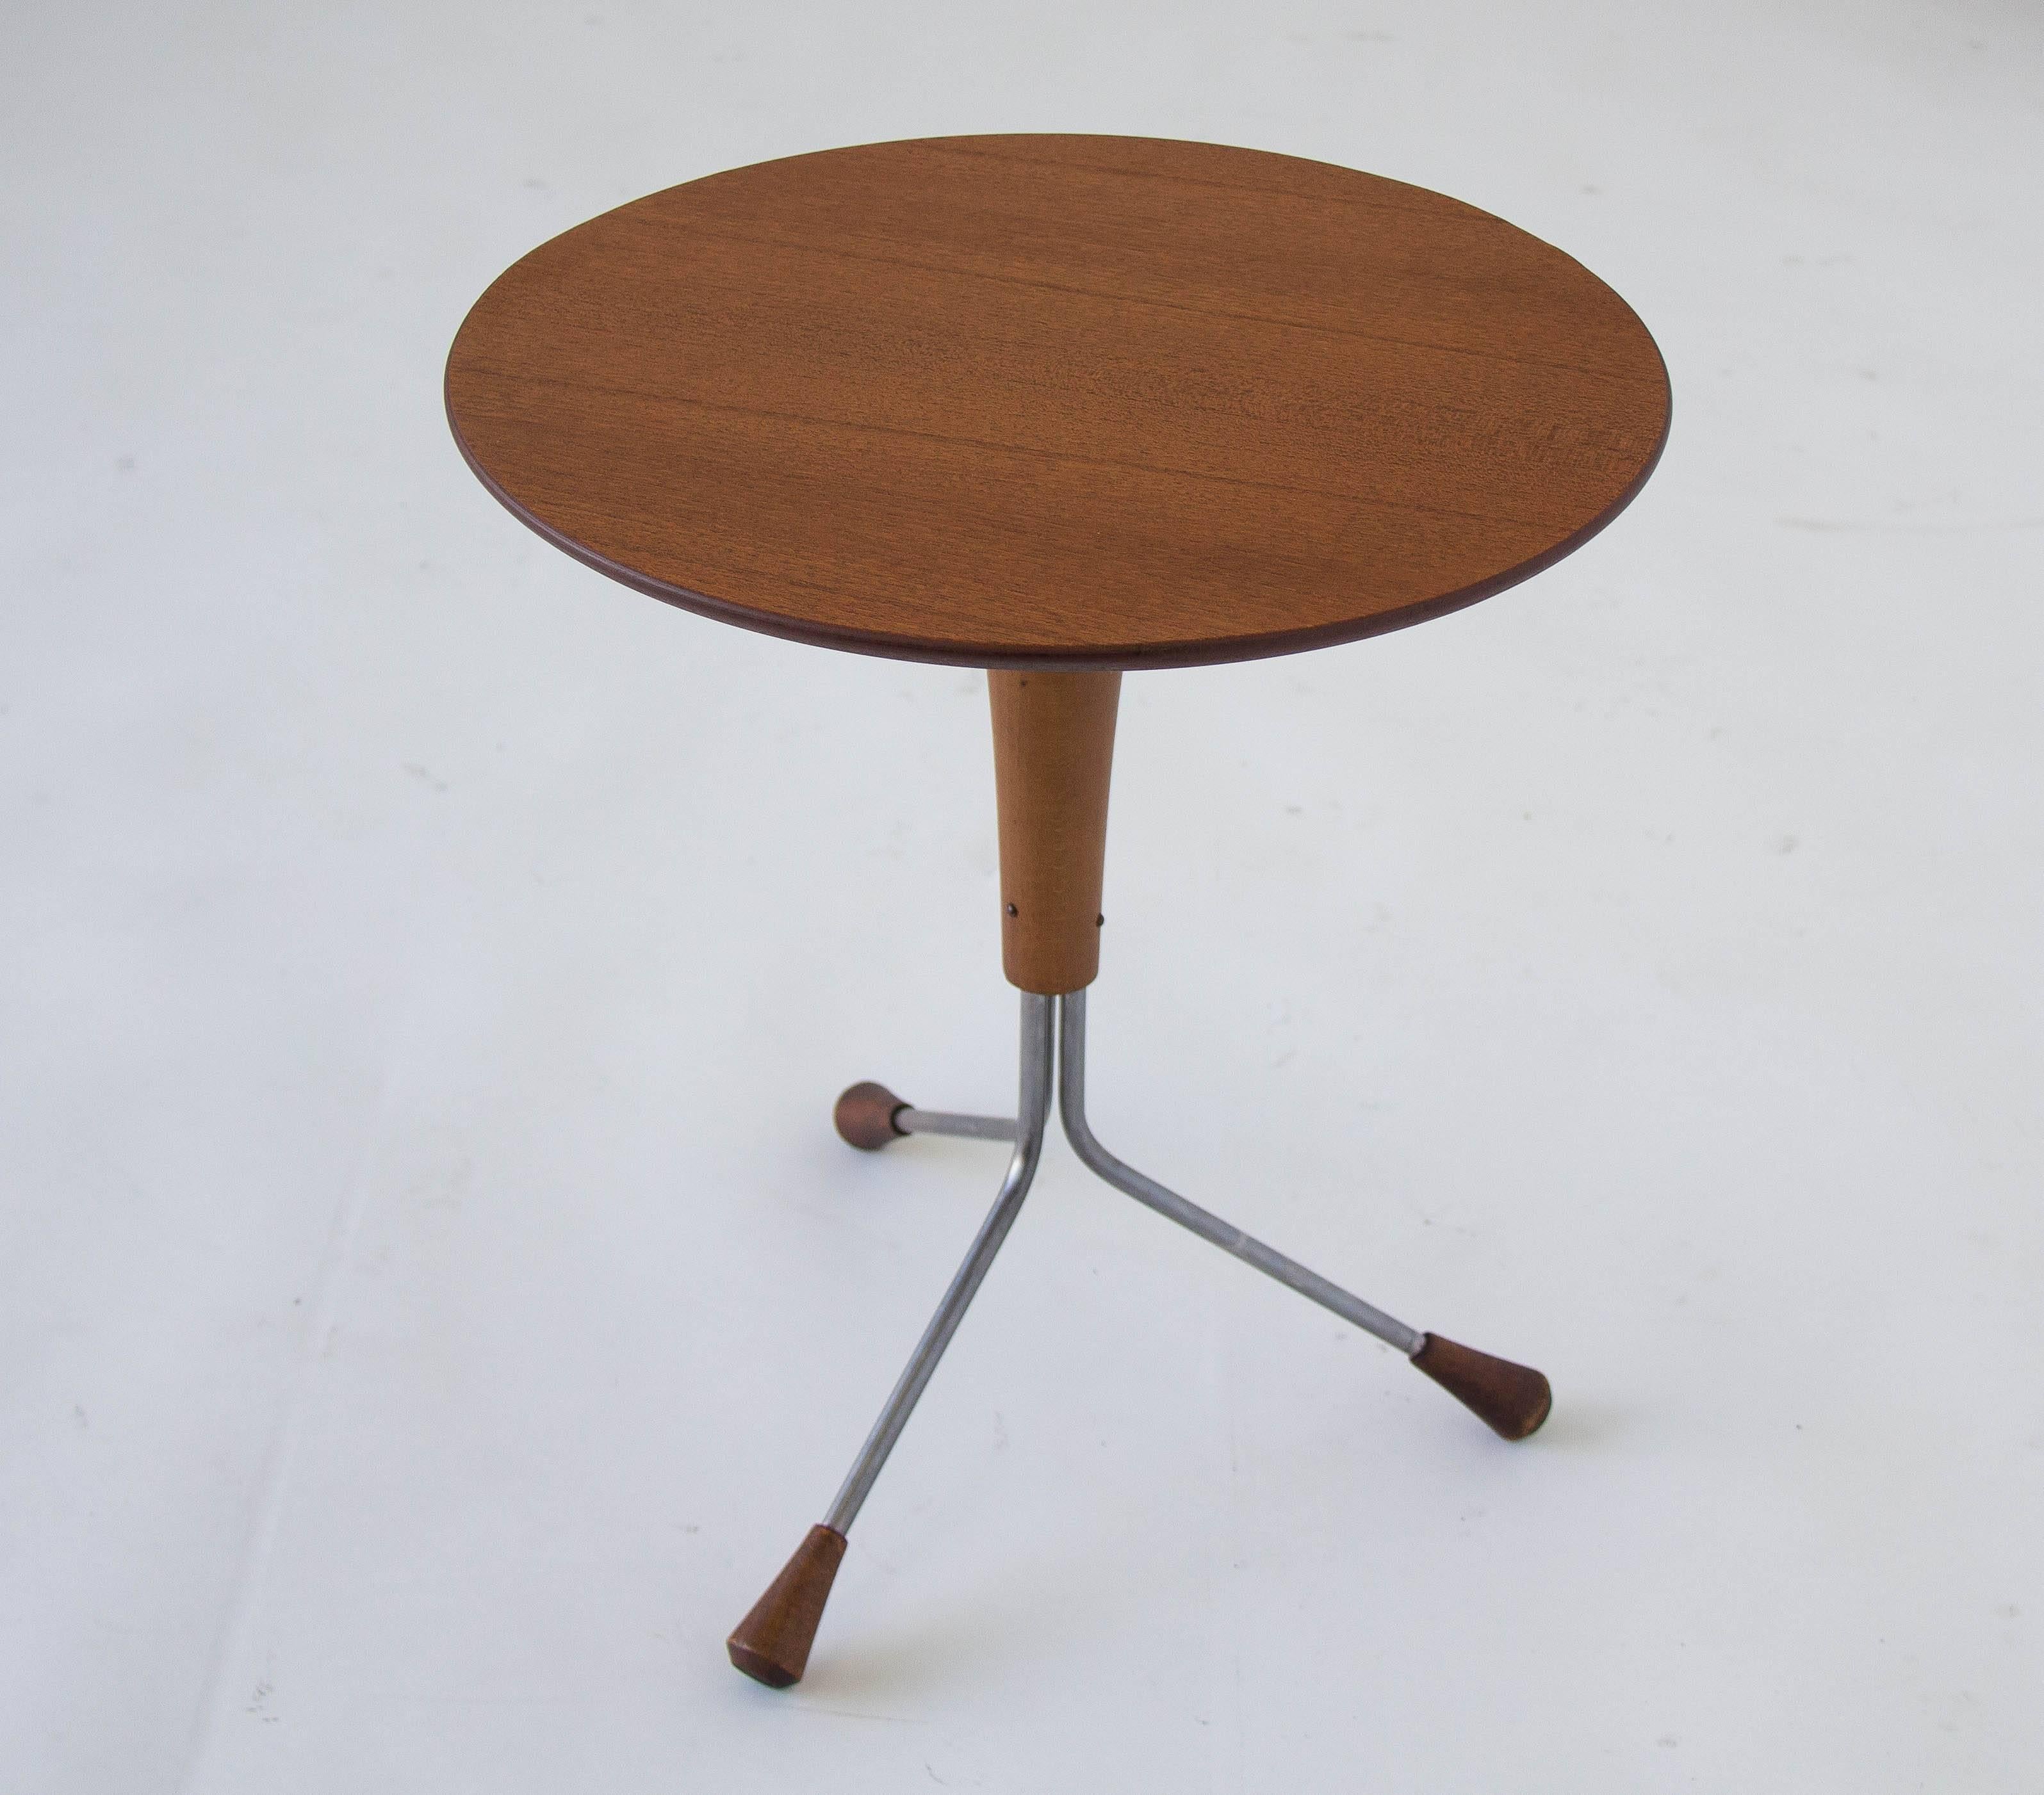 A small round teak side table, designed by Albert Larsson for his company Alberts Tibro of Sweden. The table has a tripod base of polished steel legs with teak feet. Label on underside of tabletop identifies the model as the “013 Snack Table” and